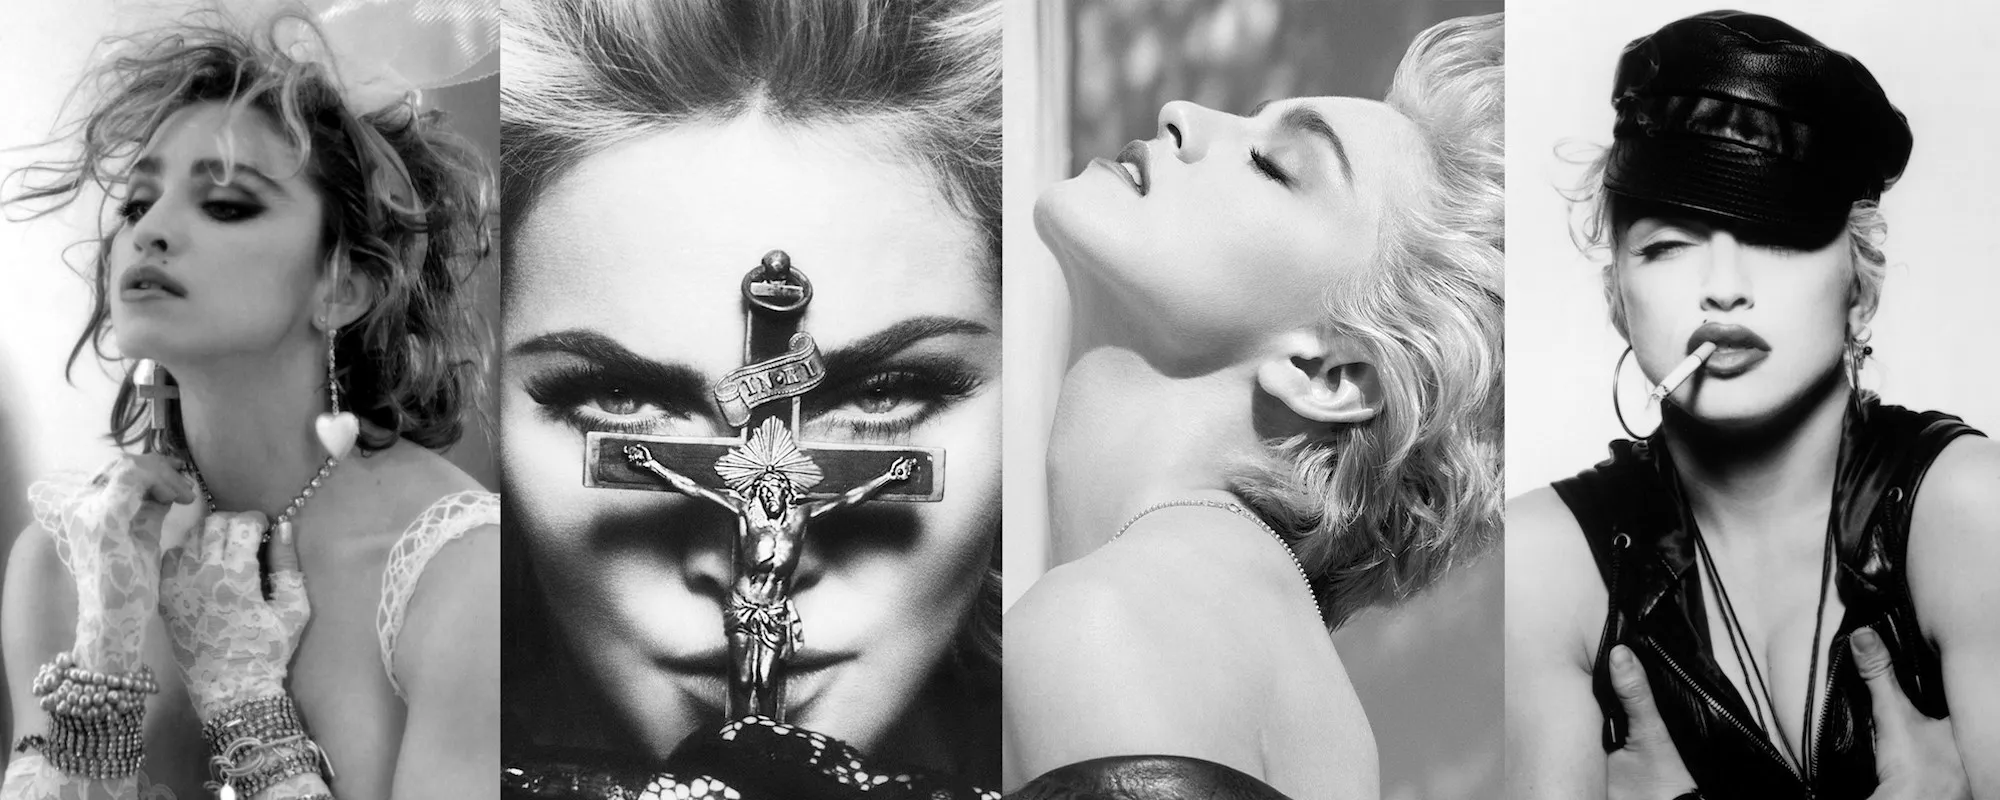 7 No. 1 ’80s Hits Written by Madonna